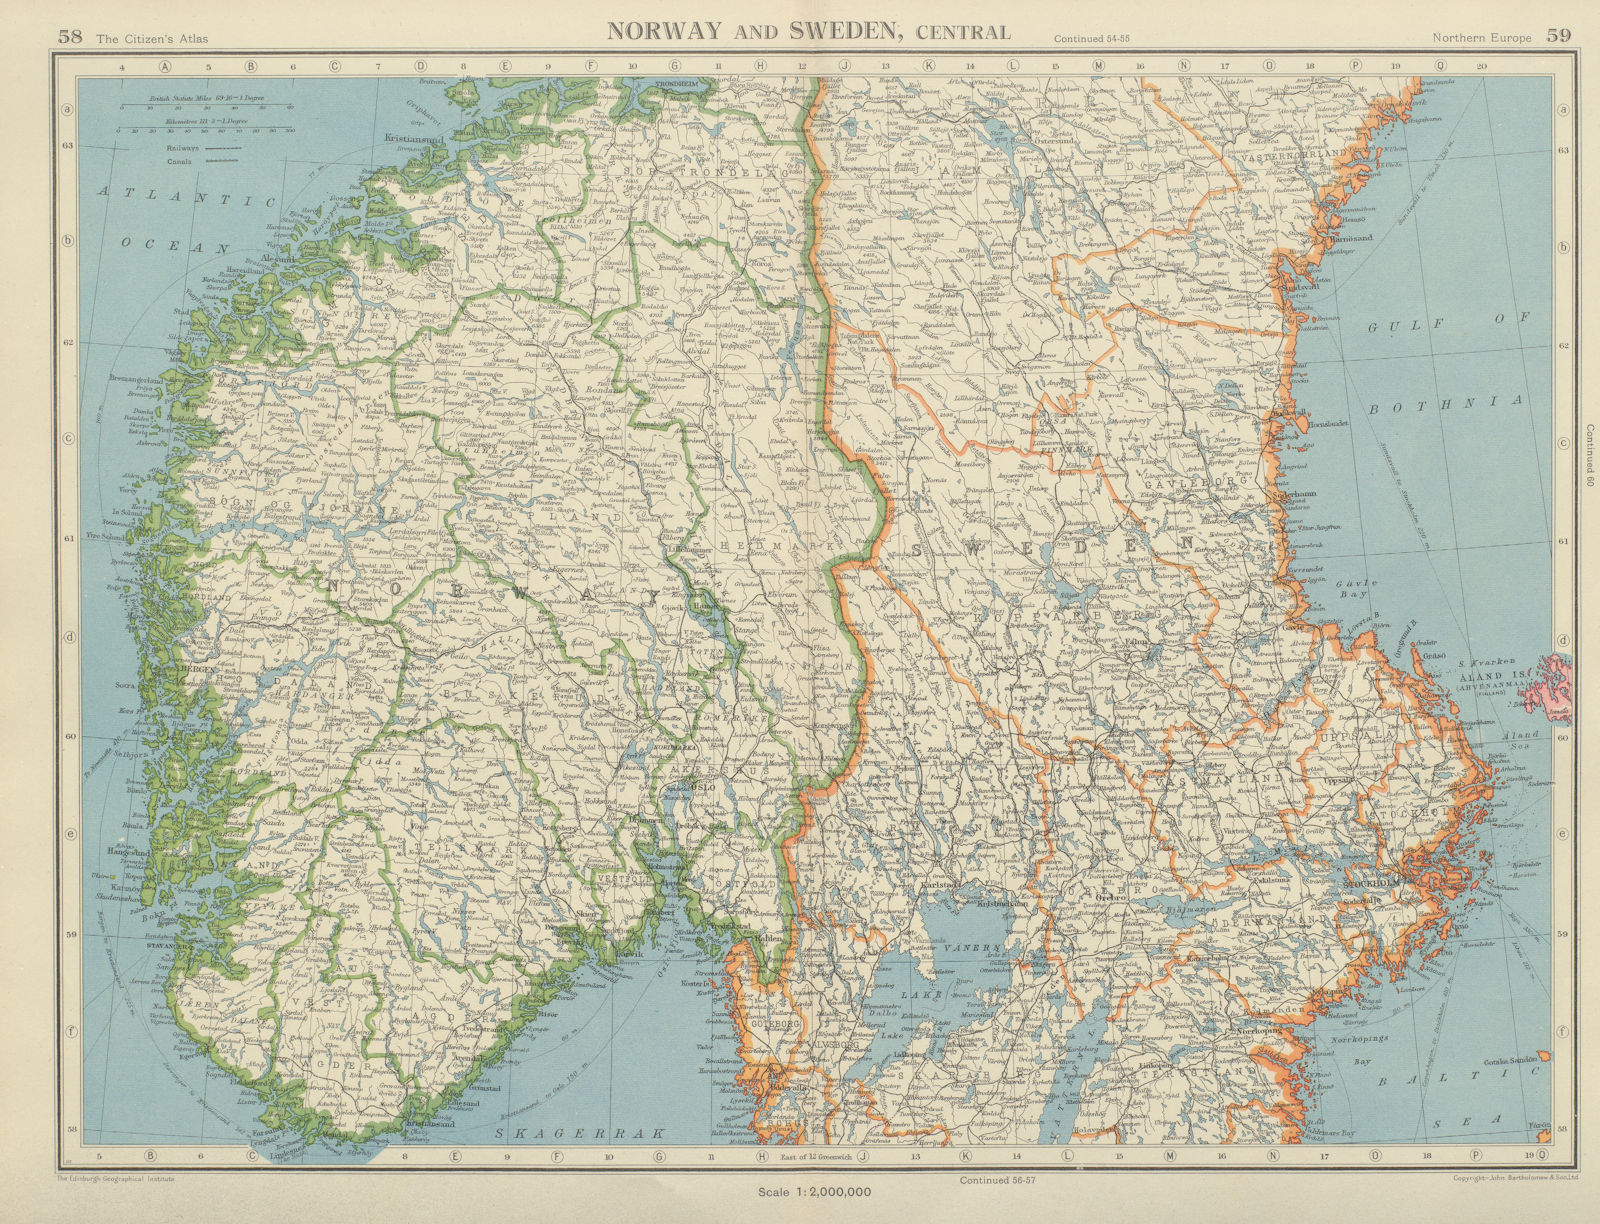 SCANDINAVIA. Norway and Sweden, Central. Railways. BARTHOLOMEW 1947 old map